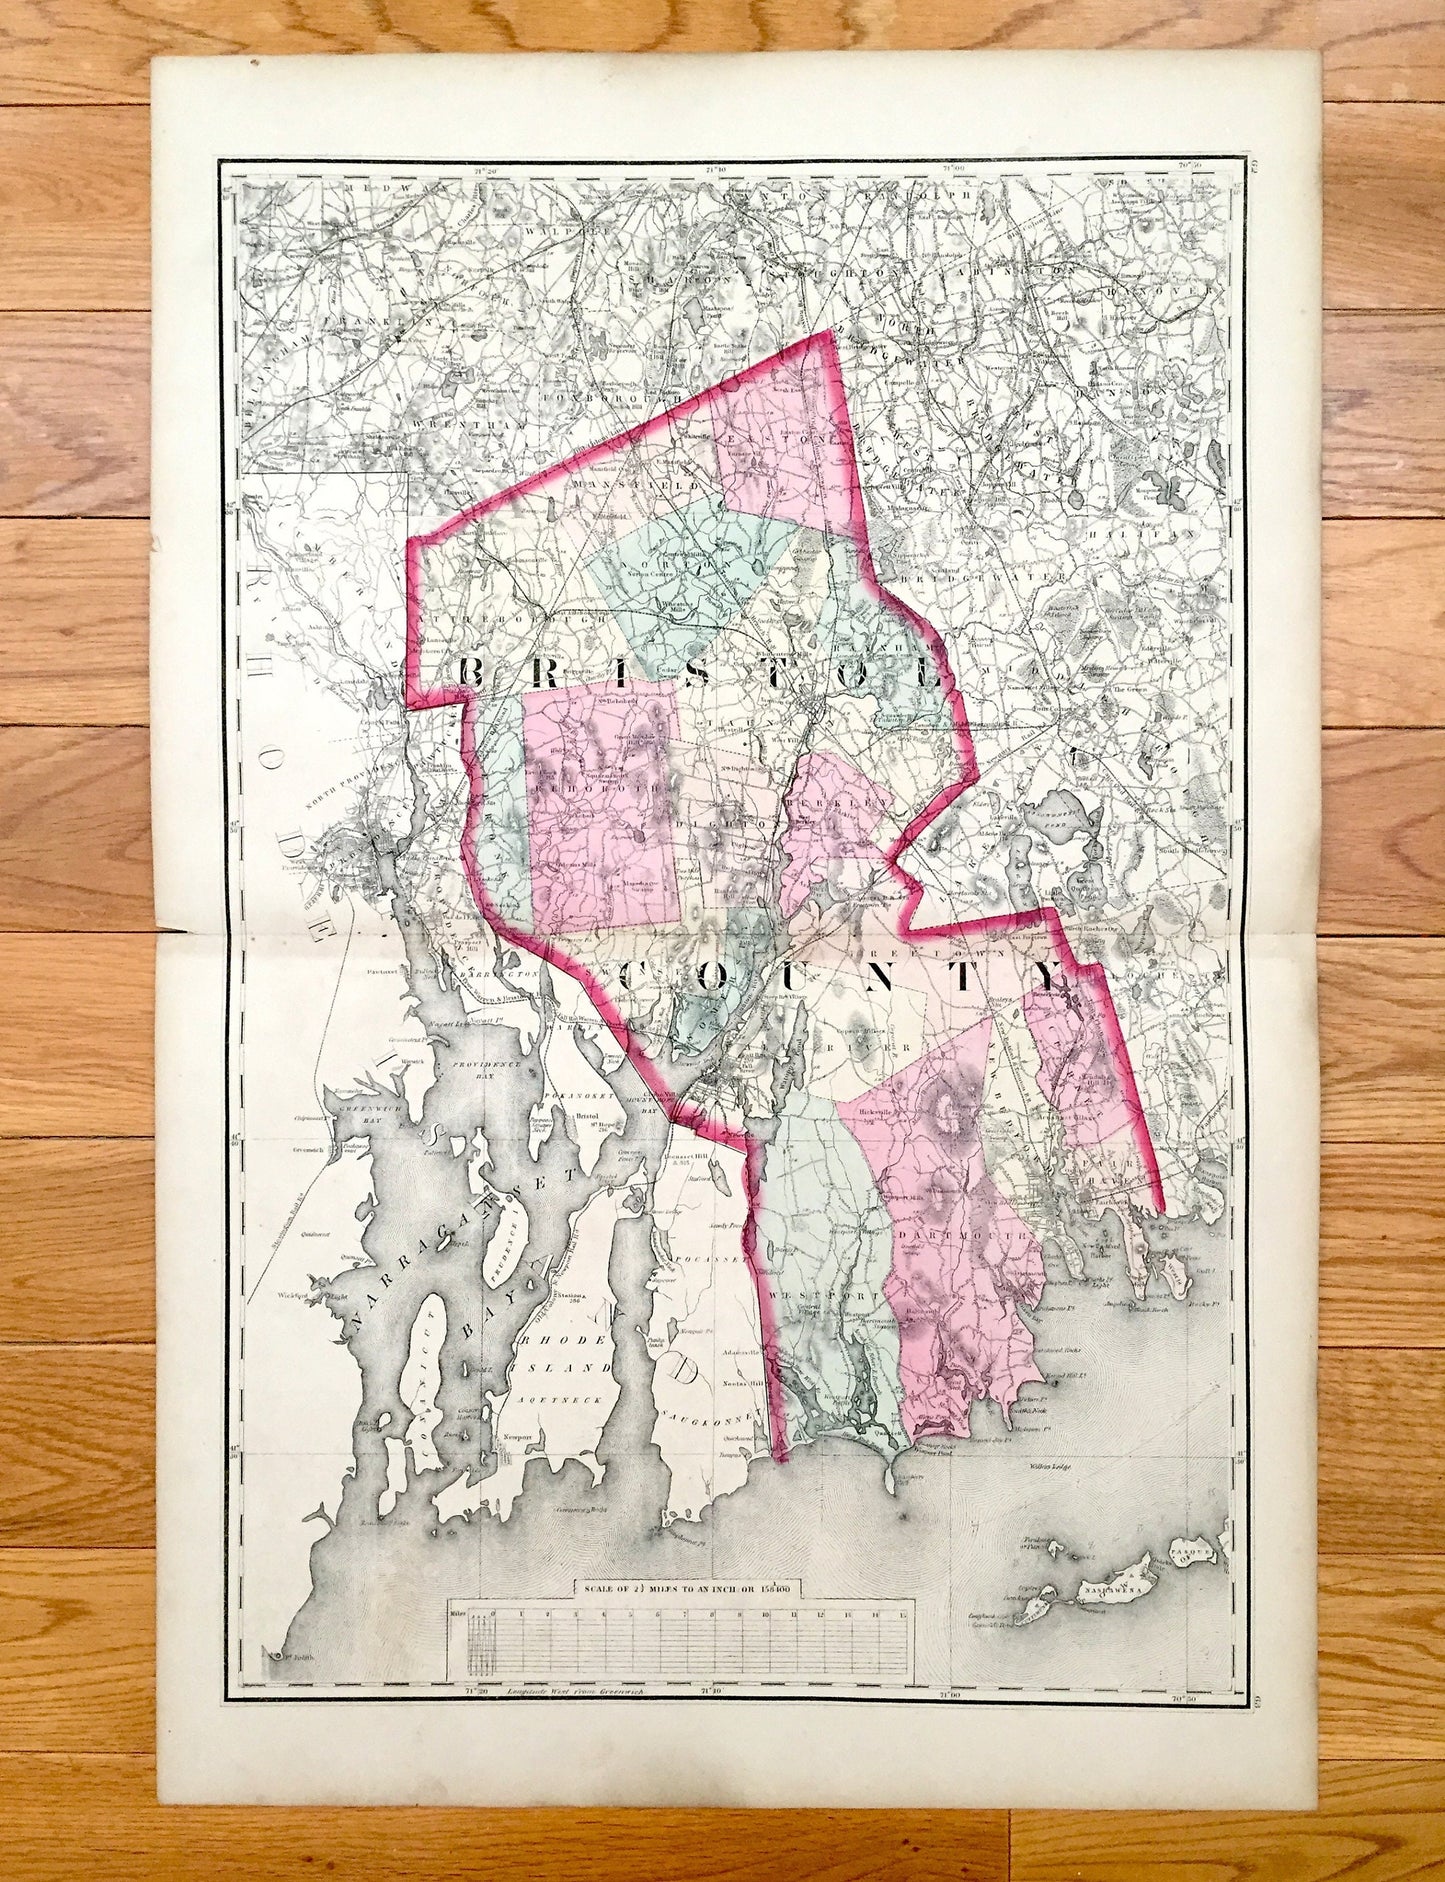 Antique 1871 Bristol County, Massachusetts Topographical Map from Stedman Brown & Lyon Atlas – Fall River, New Bedford Westport Dartmouth MA